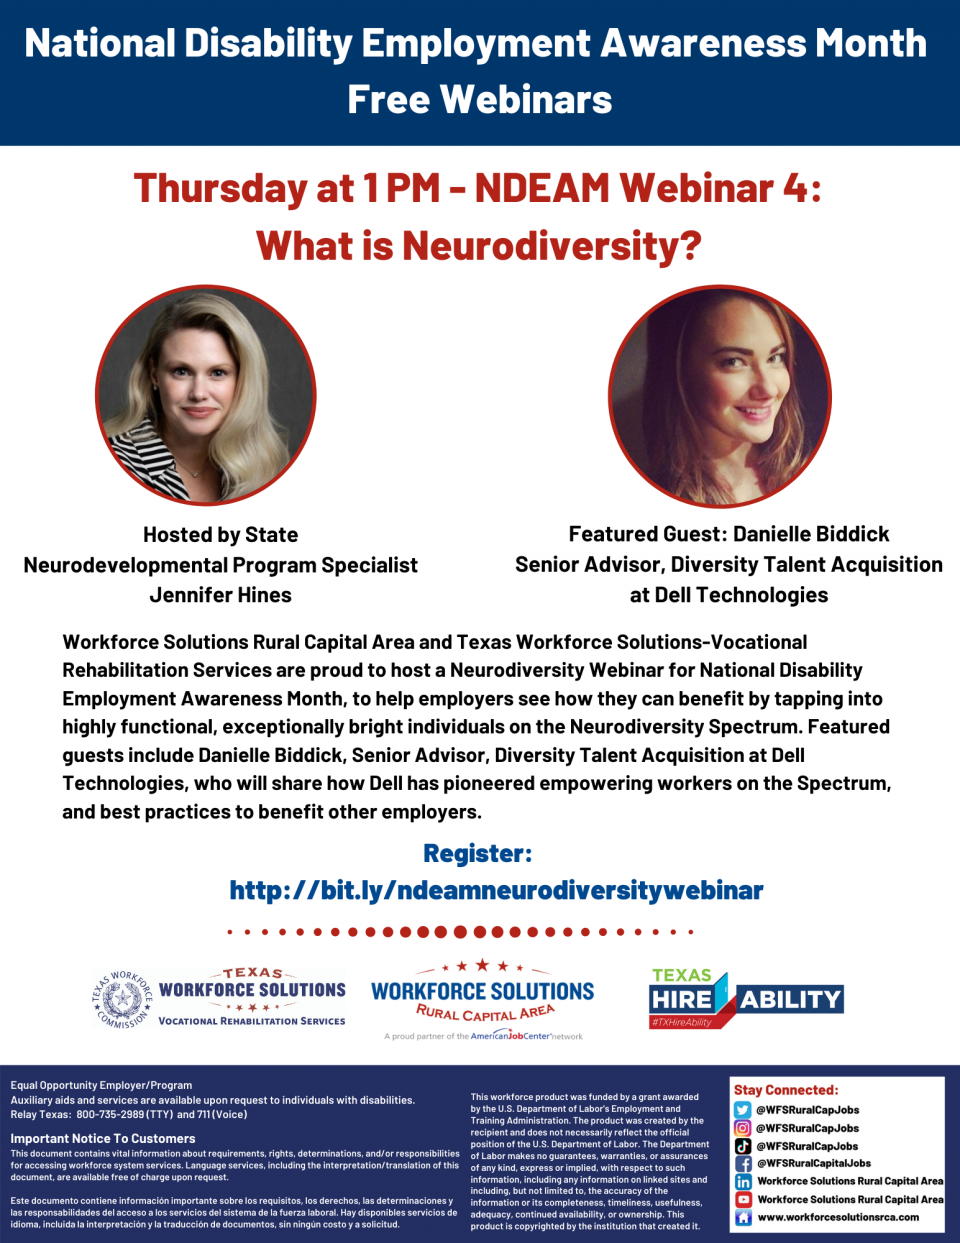 Take Part in the National Disability Employment Awareness Month Webinar 'What is Neurodiversity?'